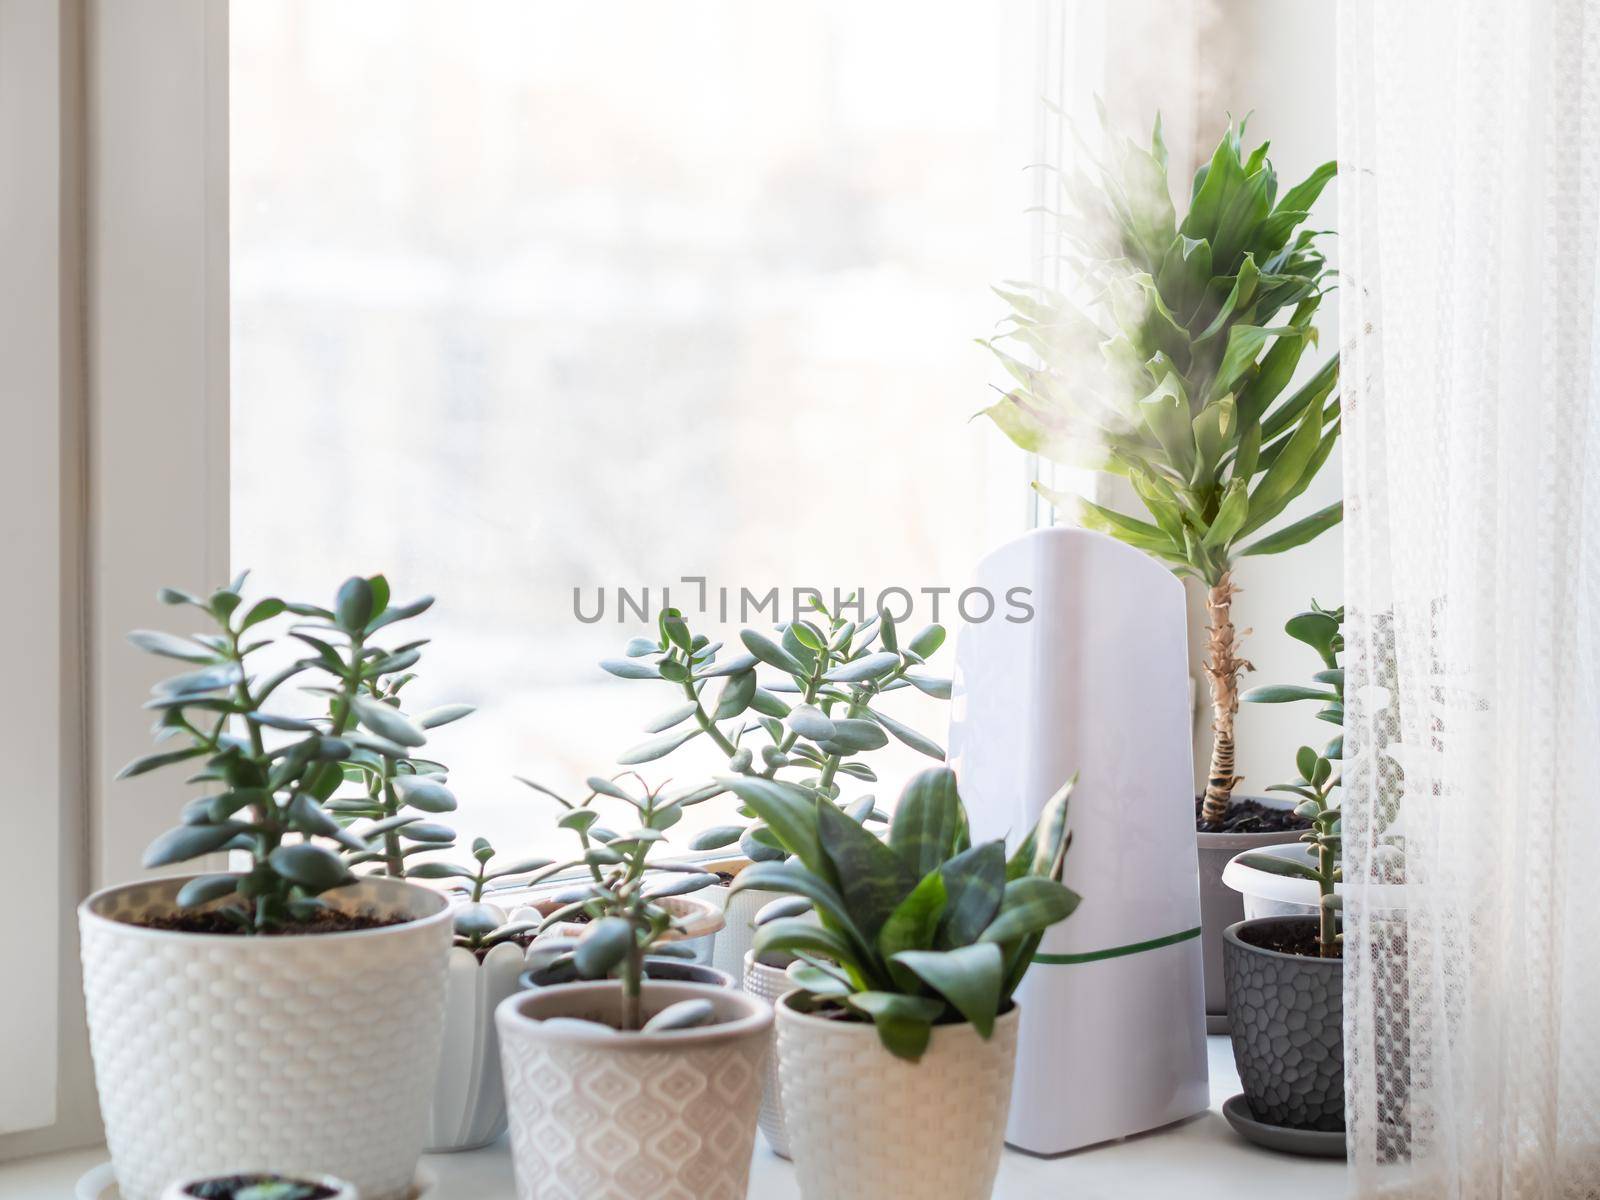 Ultrasonic humidifier among houseplants. Flower pots with succulent plants on windowsill. Water steam moisturizes dry air at home. Electric device for comfort atmosphere in living room. by aksenovko